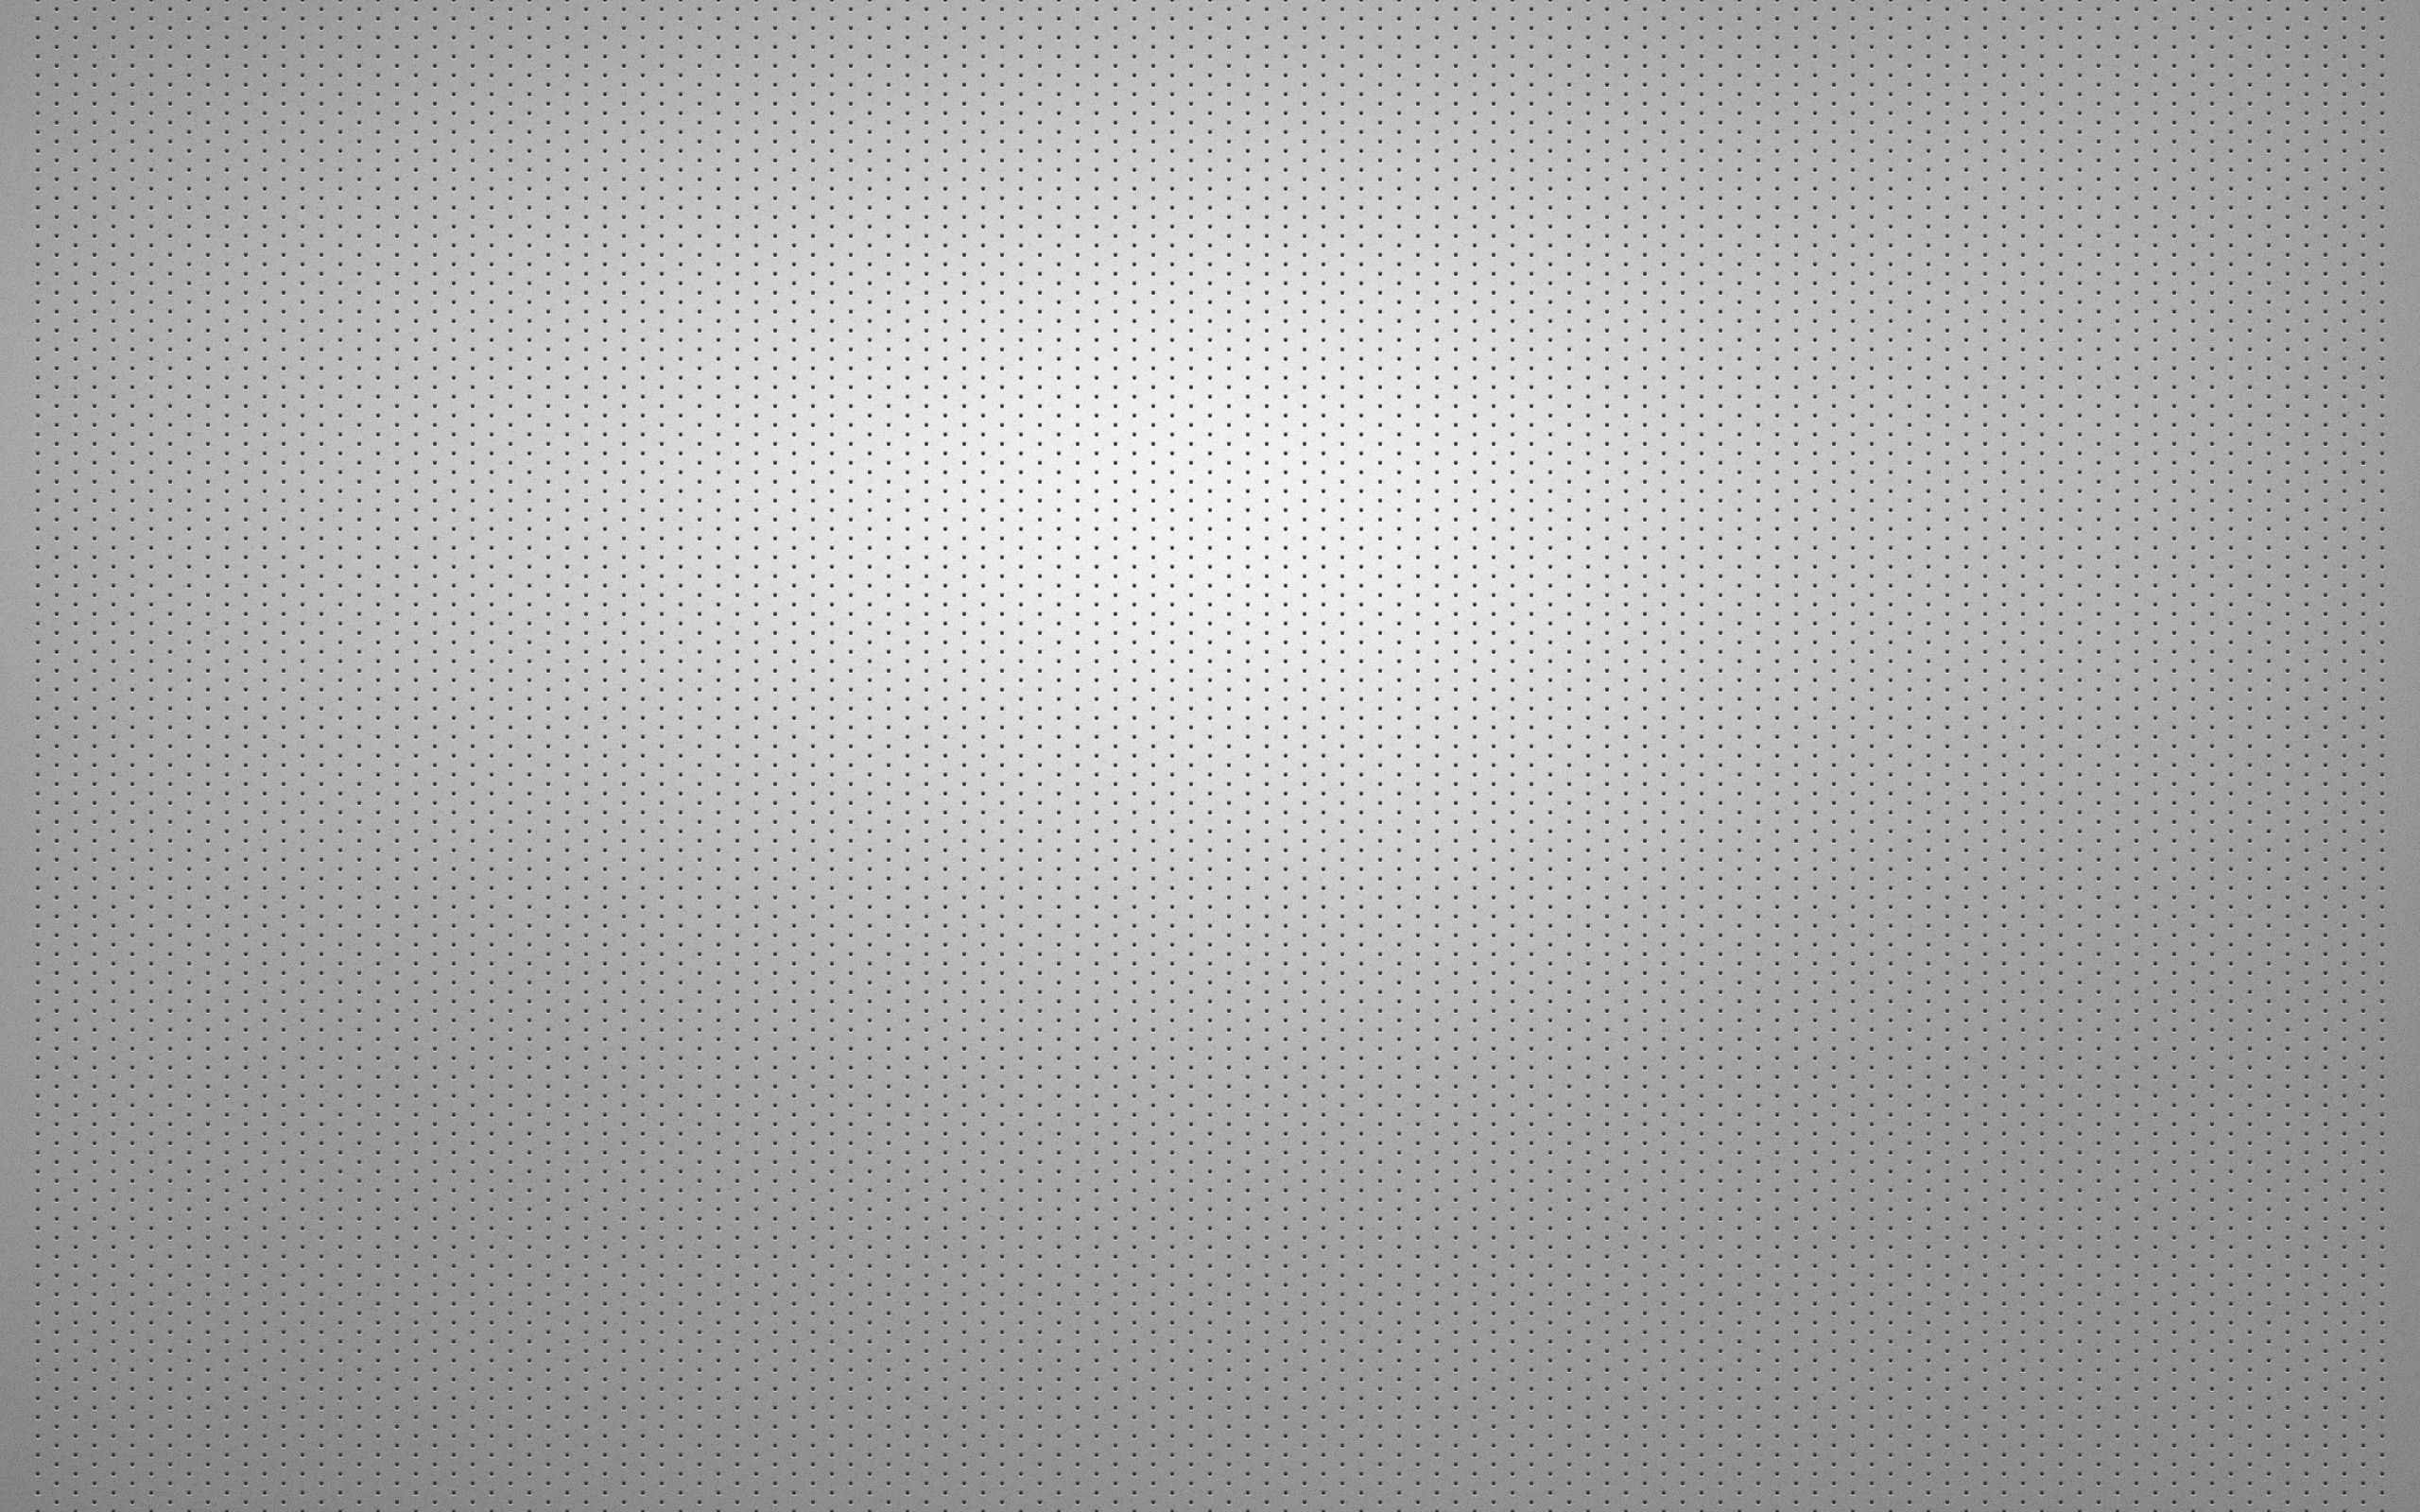 grid, silver, texture, background, points, point, textures UHD